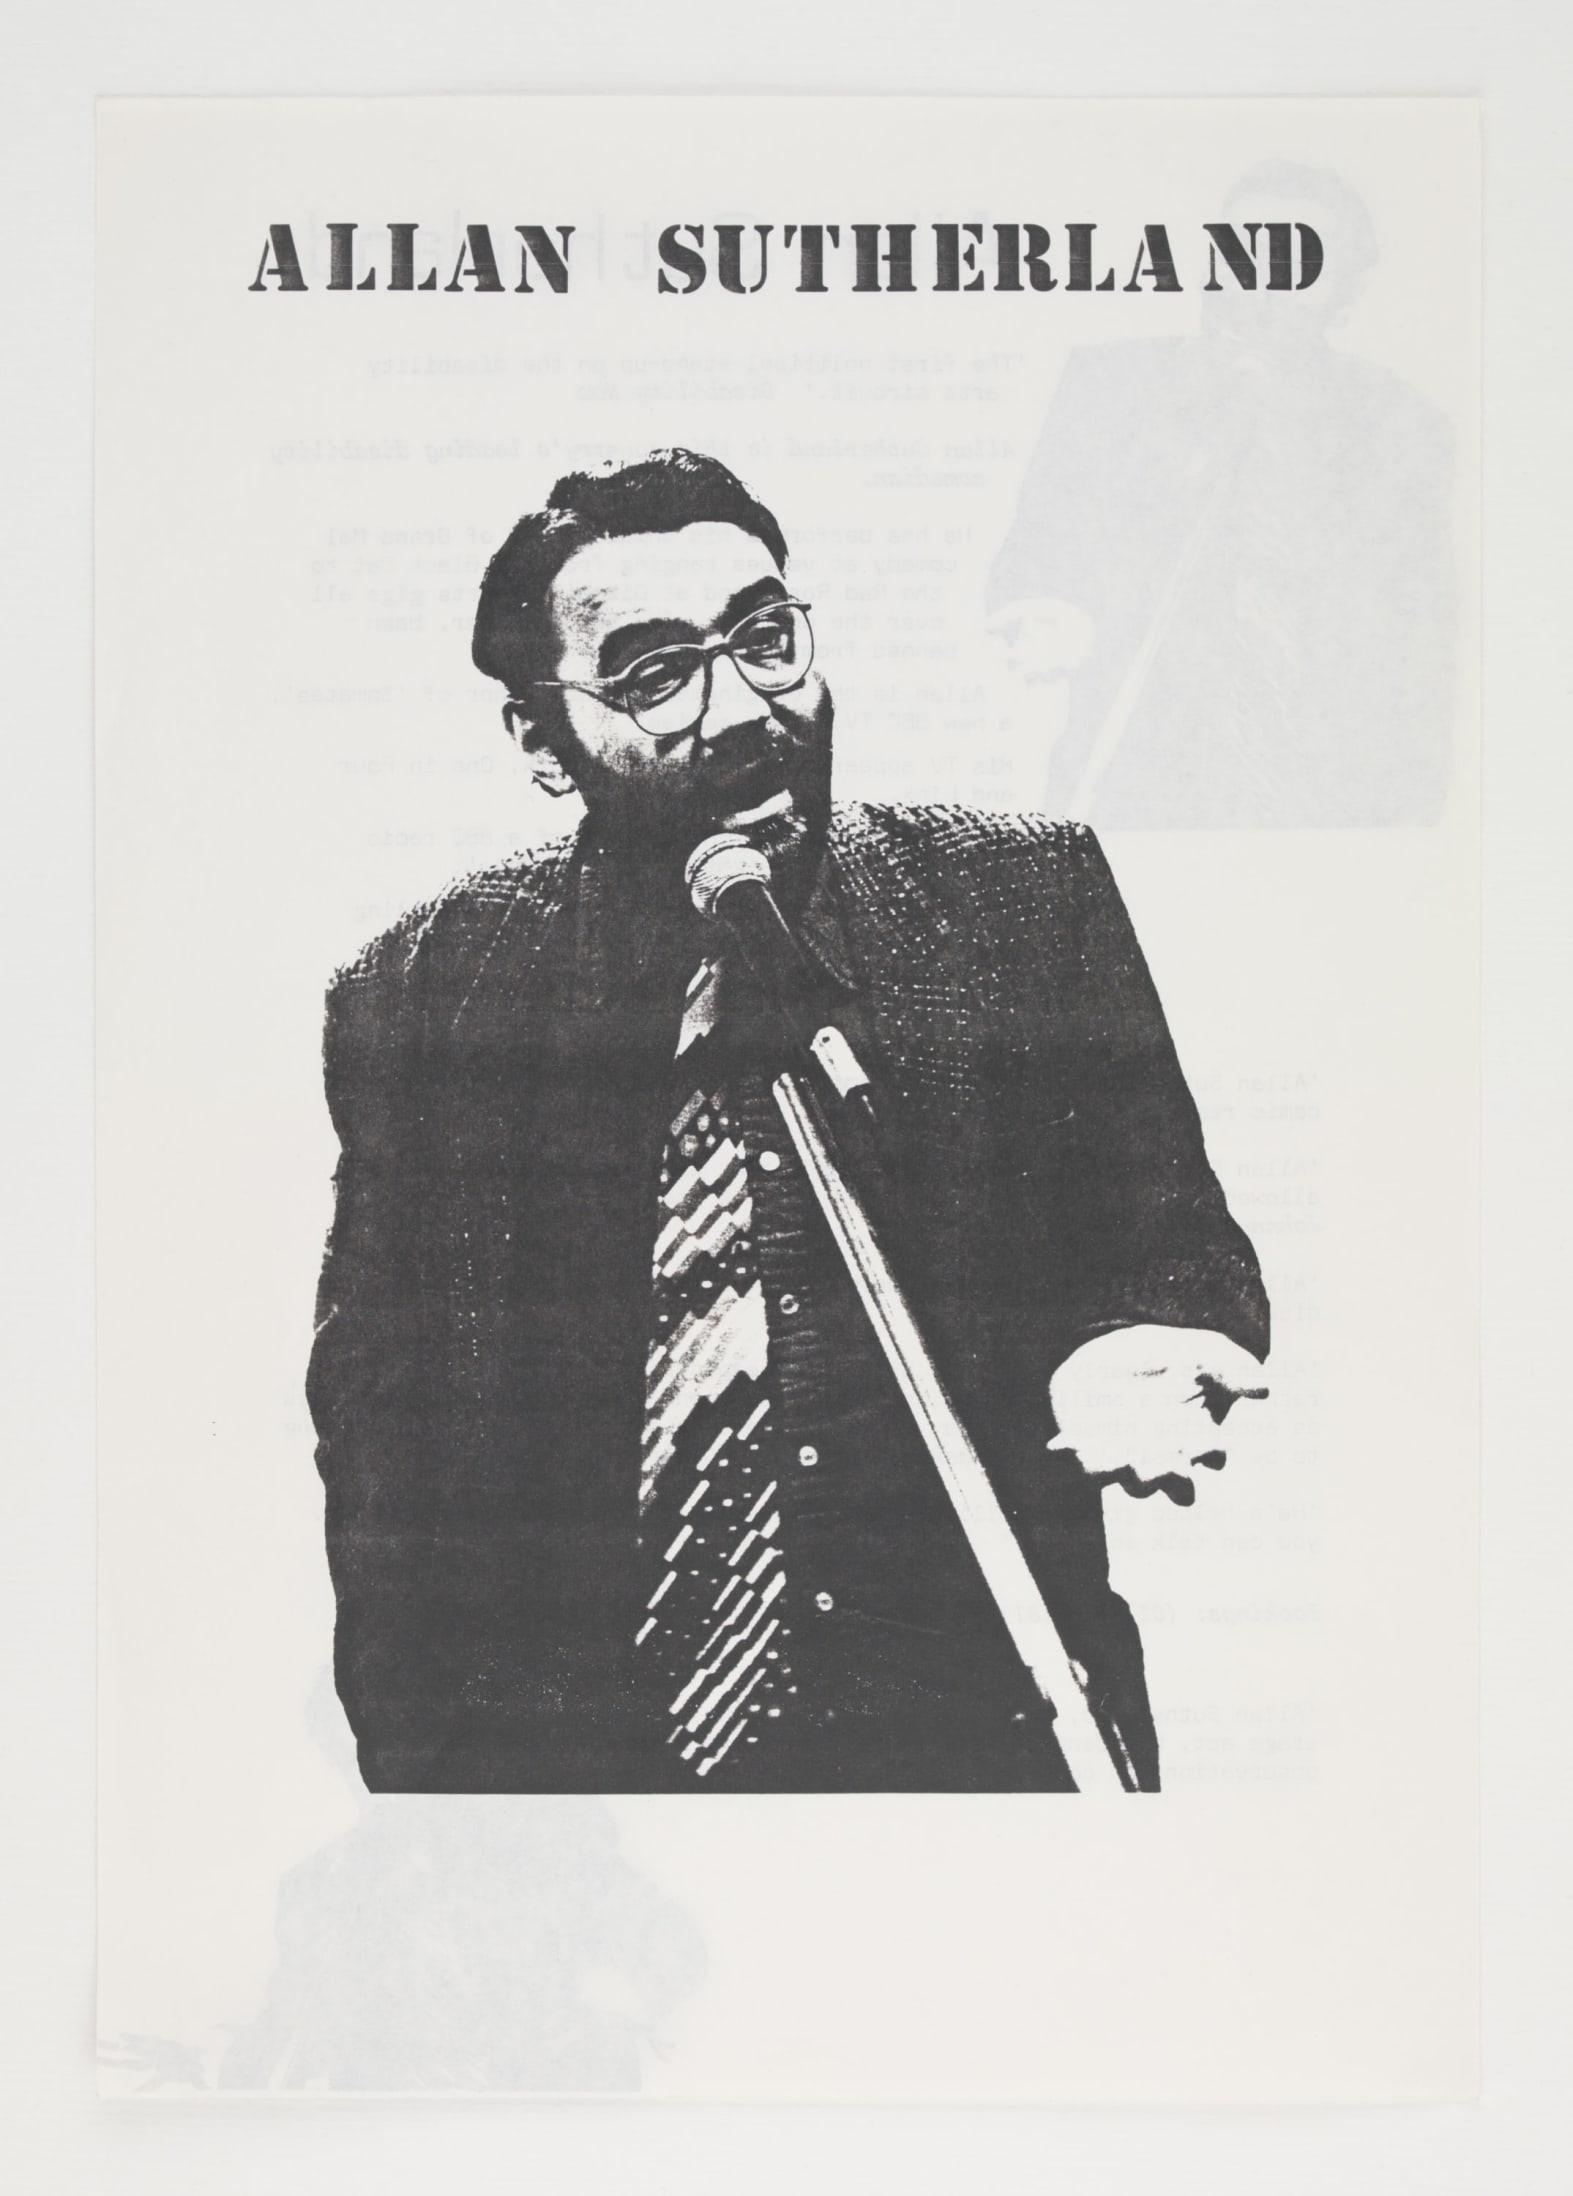 Black and white photo of a man laughing into a microphone against a white background. It looks like a poster for stand-up comedy.